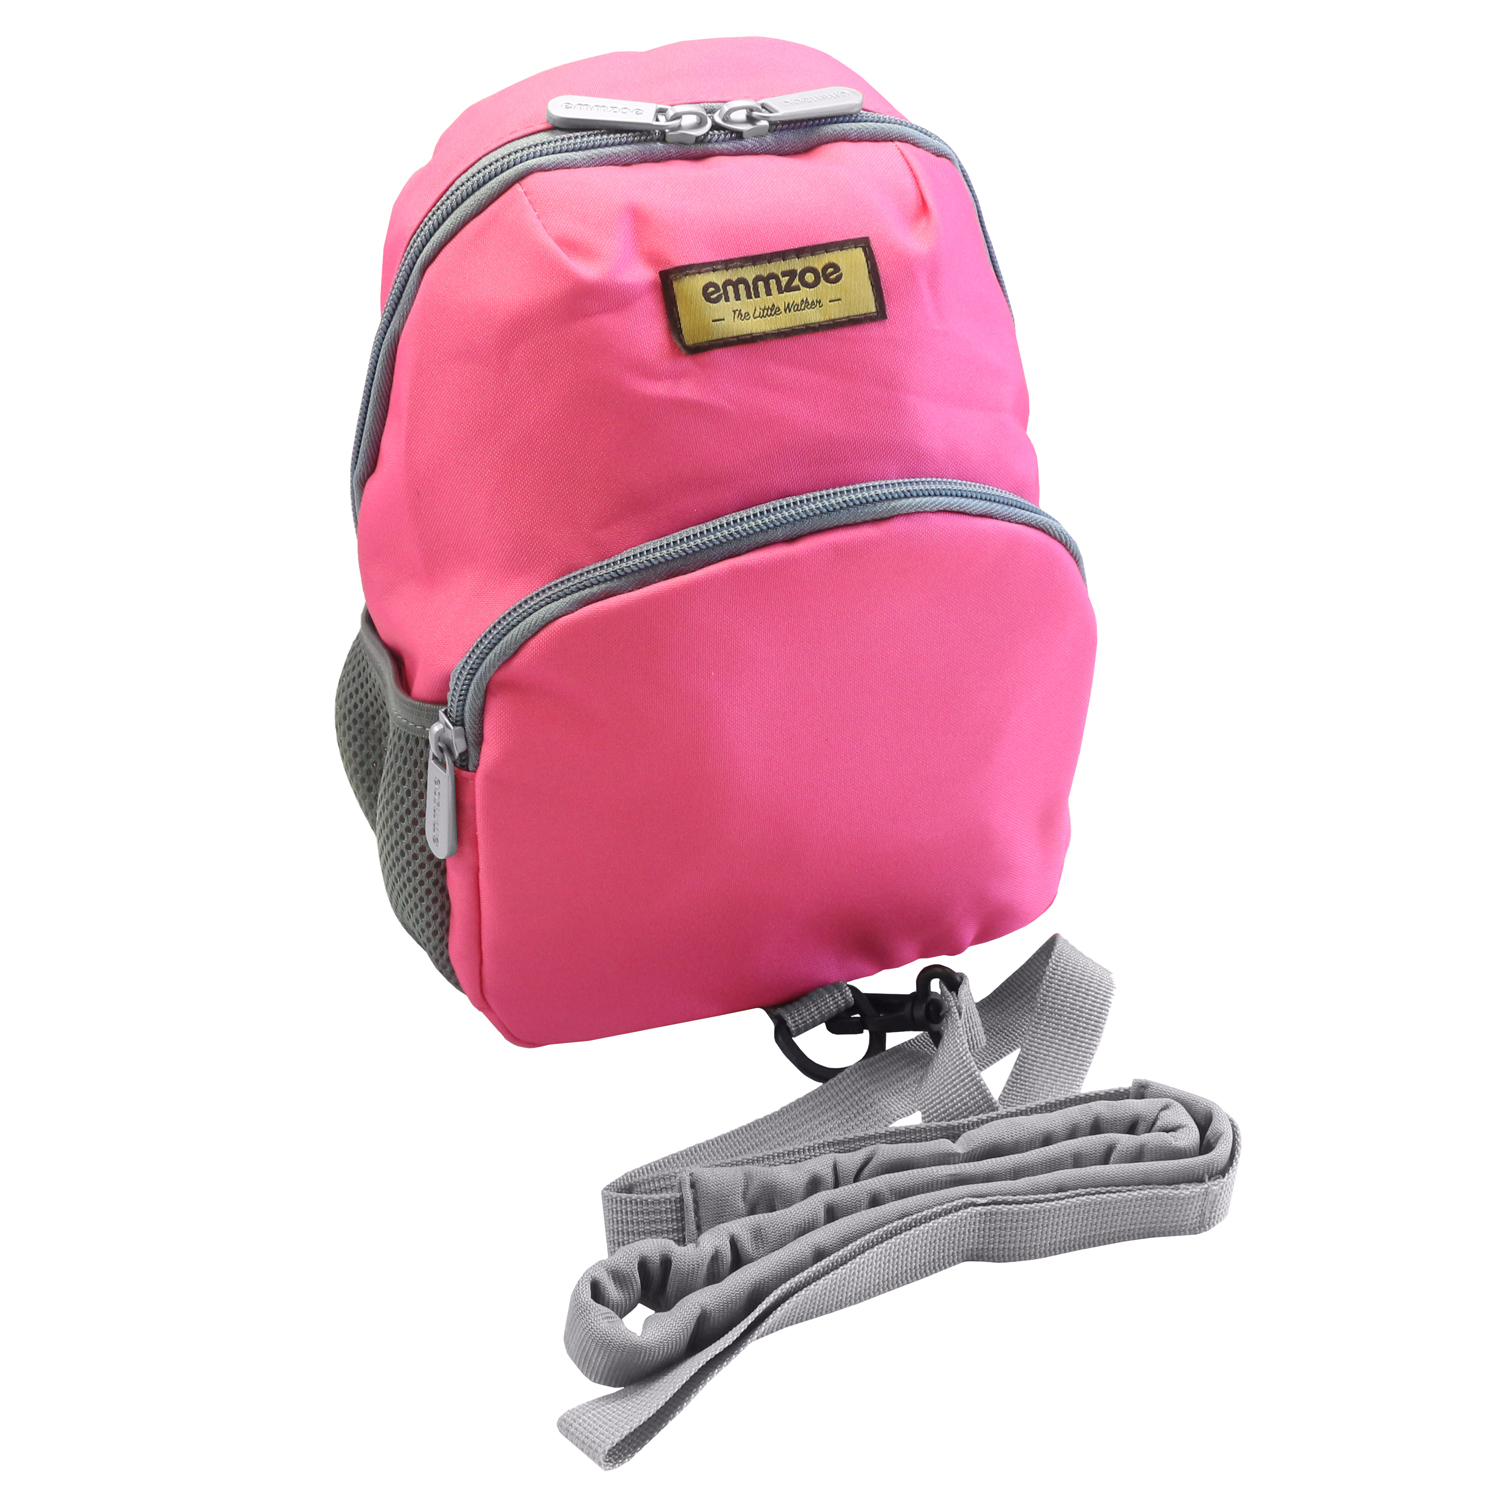 Emmzoe Little Walker Neon Toddler Backpack with Safety Harness Leash - Lightweight Fits Snacks, Food, Toys (Neon Pink) - image 1 of 4